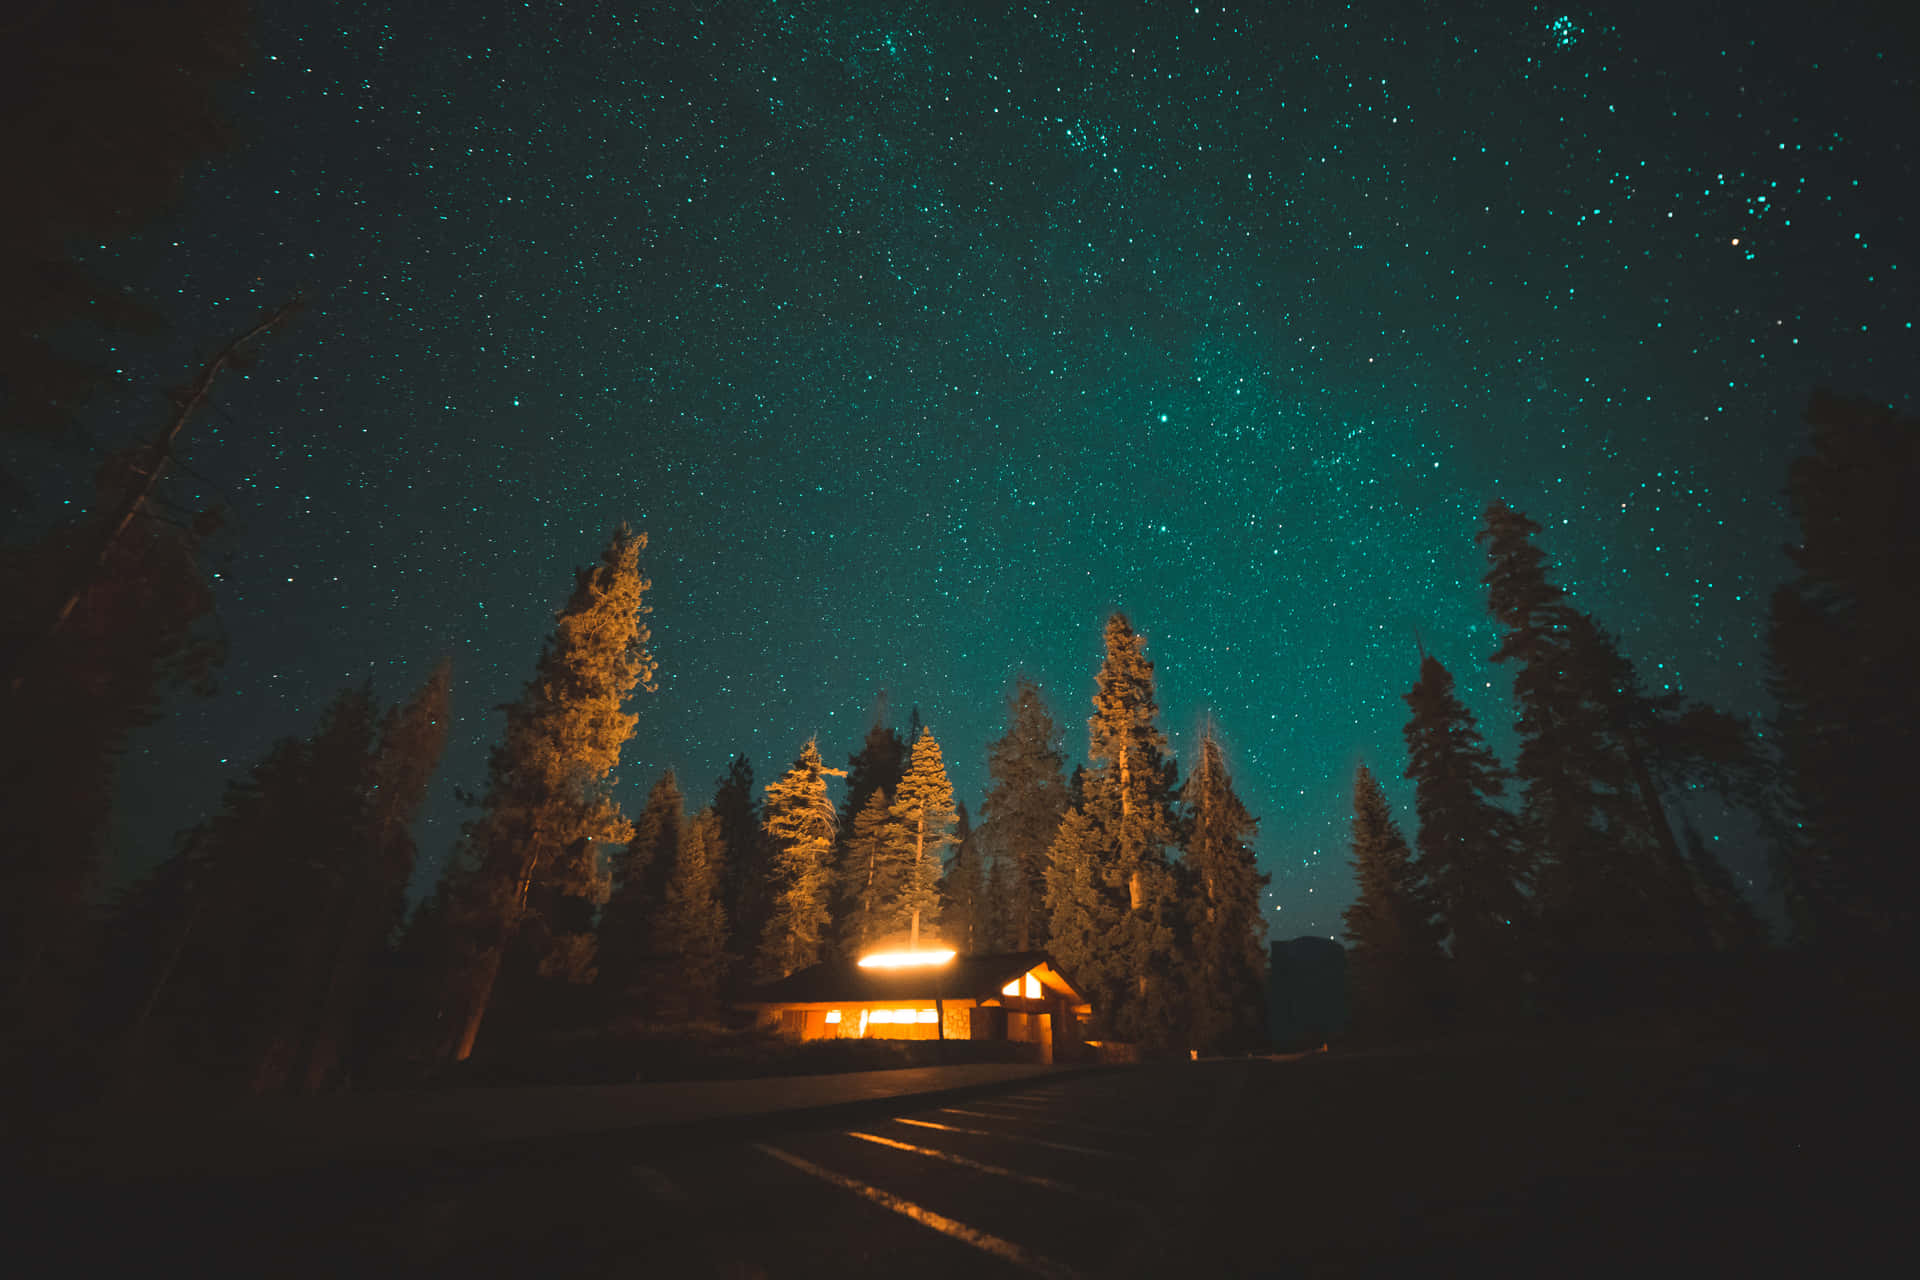 Star Sky With Cabin In Forest Wallpaper